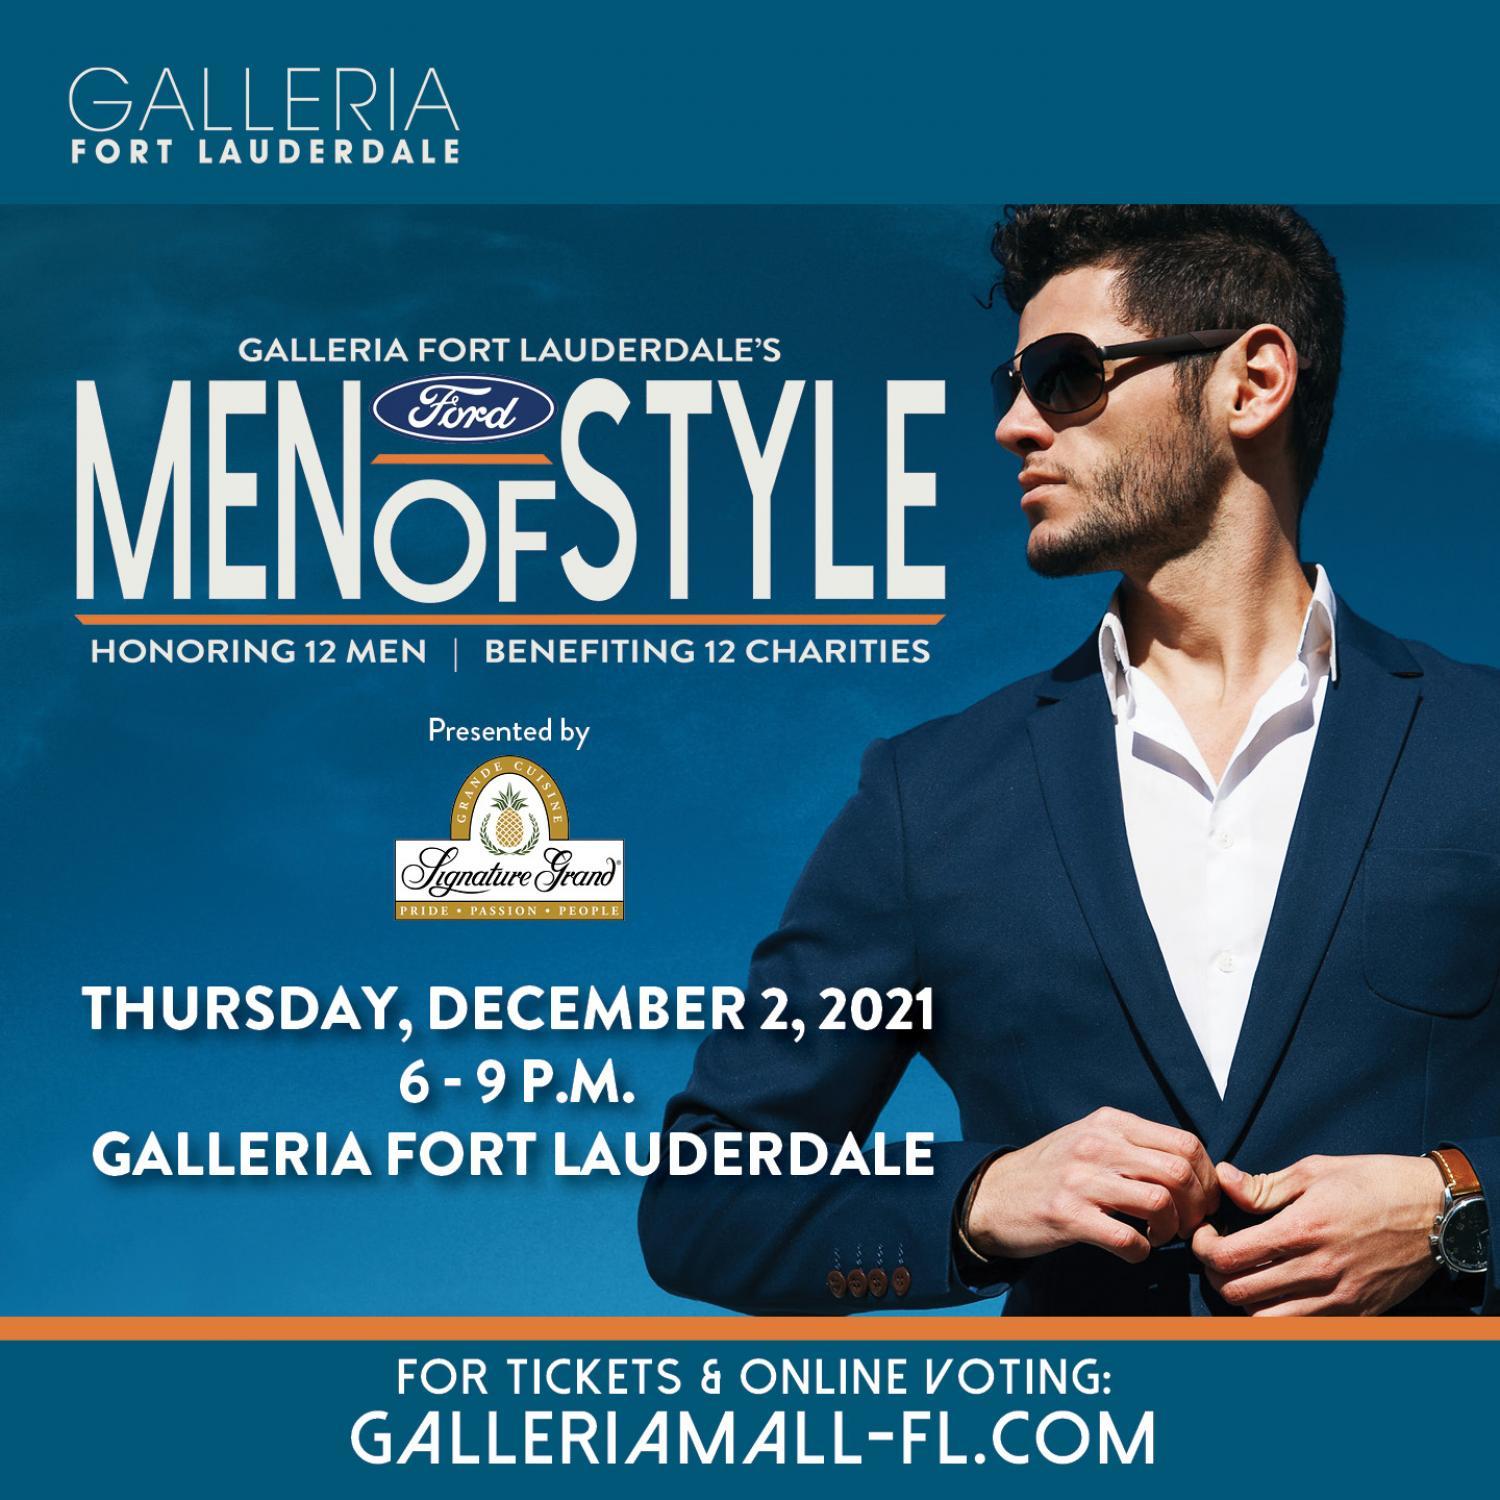 Galleria Fort Lauderdale’s Ford Men of Style presented by Signature Grand